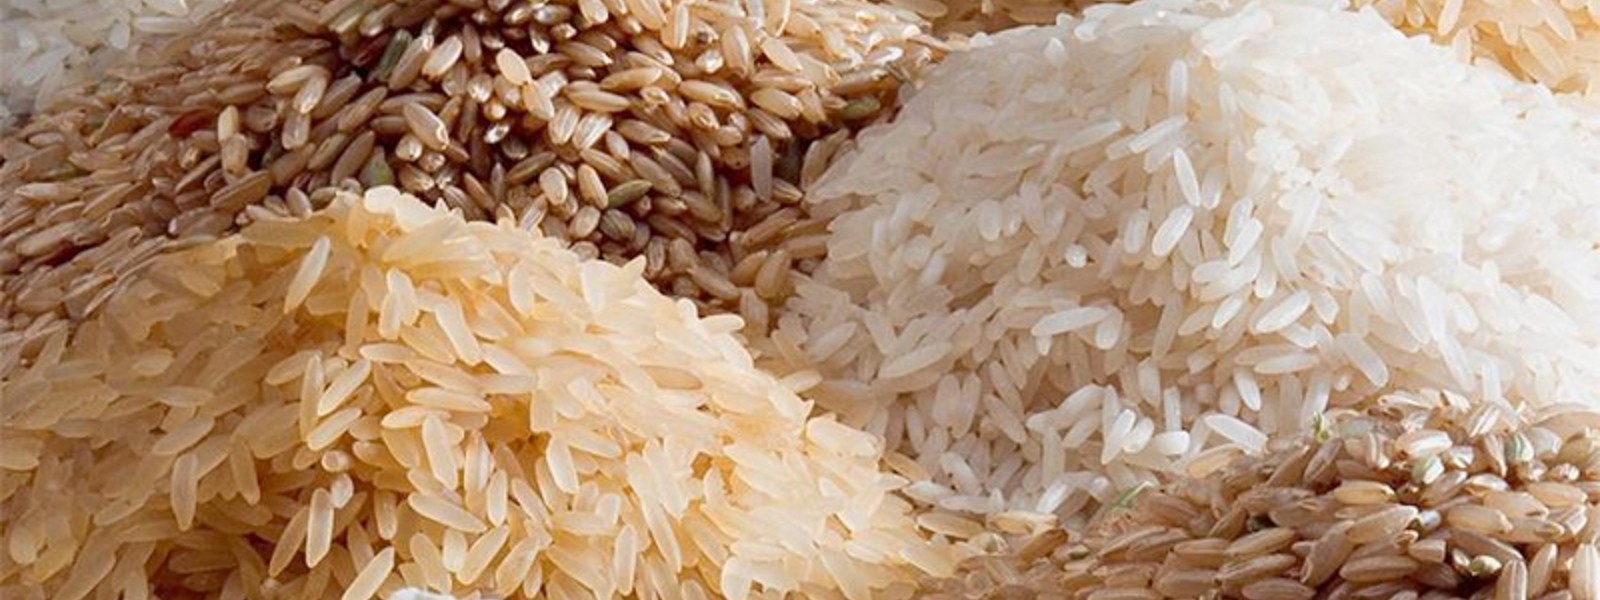 40,000 MT of rice from India to reach SL